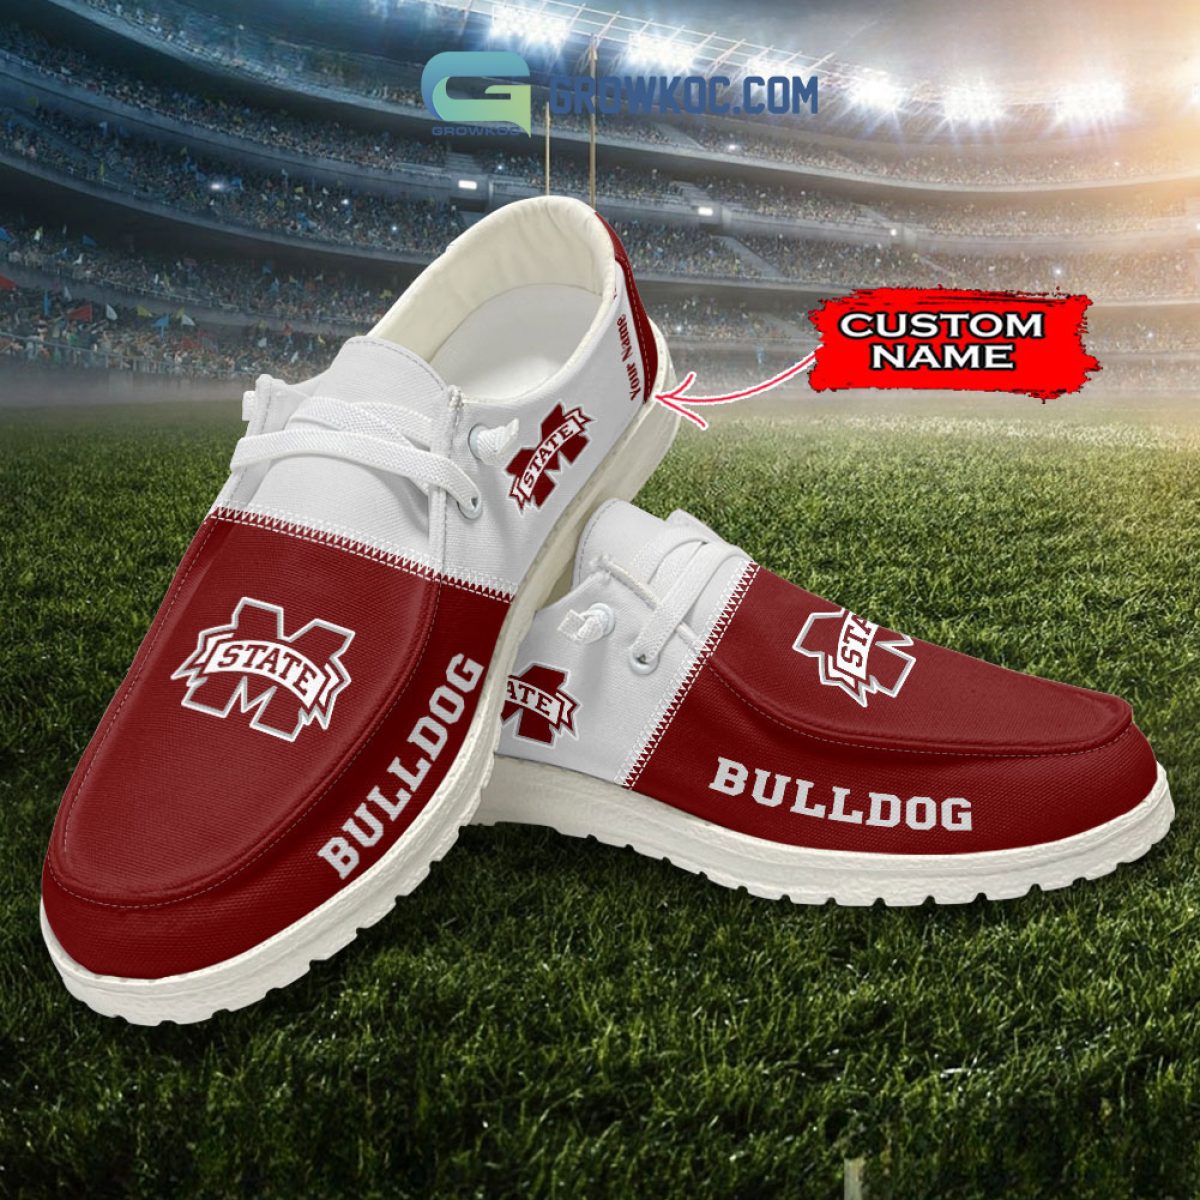 Custom Name Tennis Personalized Clog Shoes